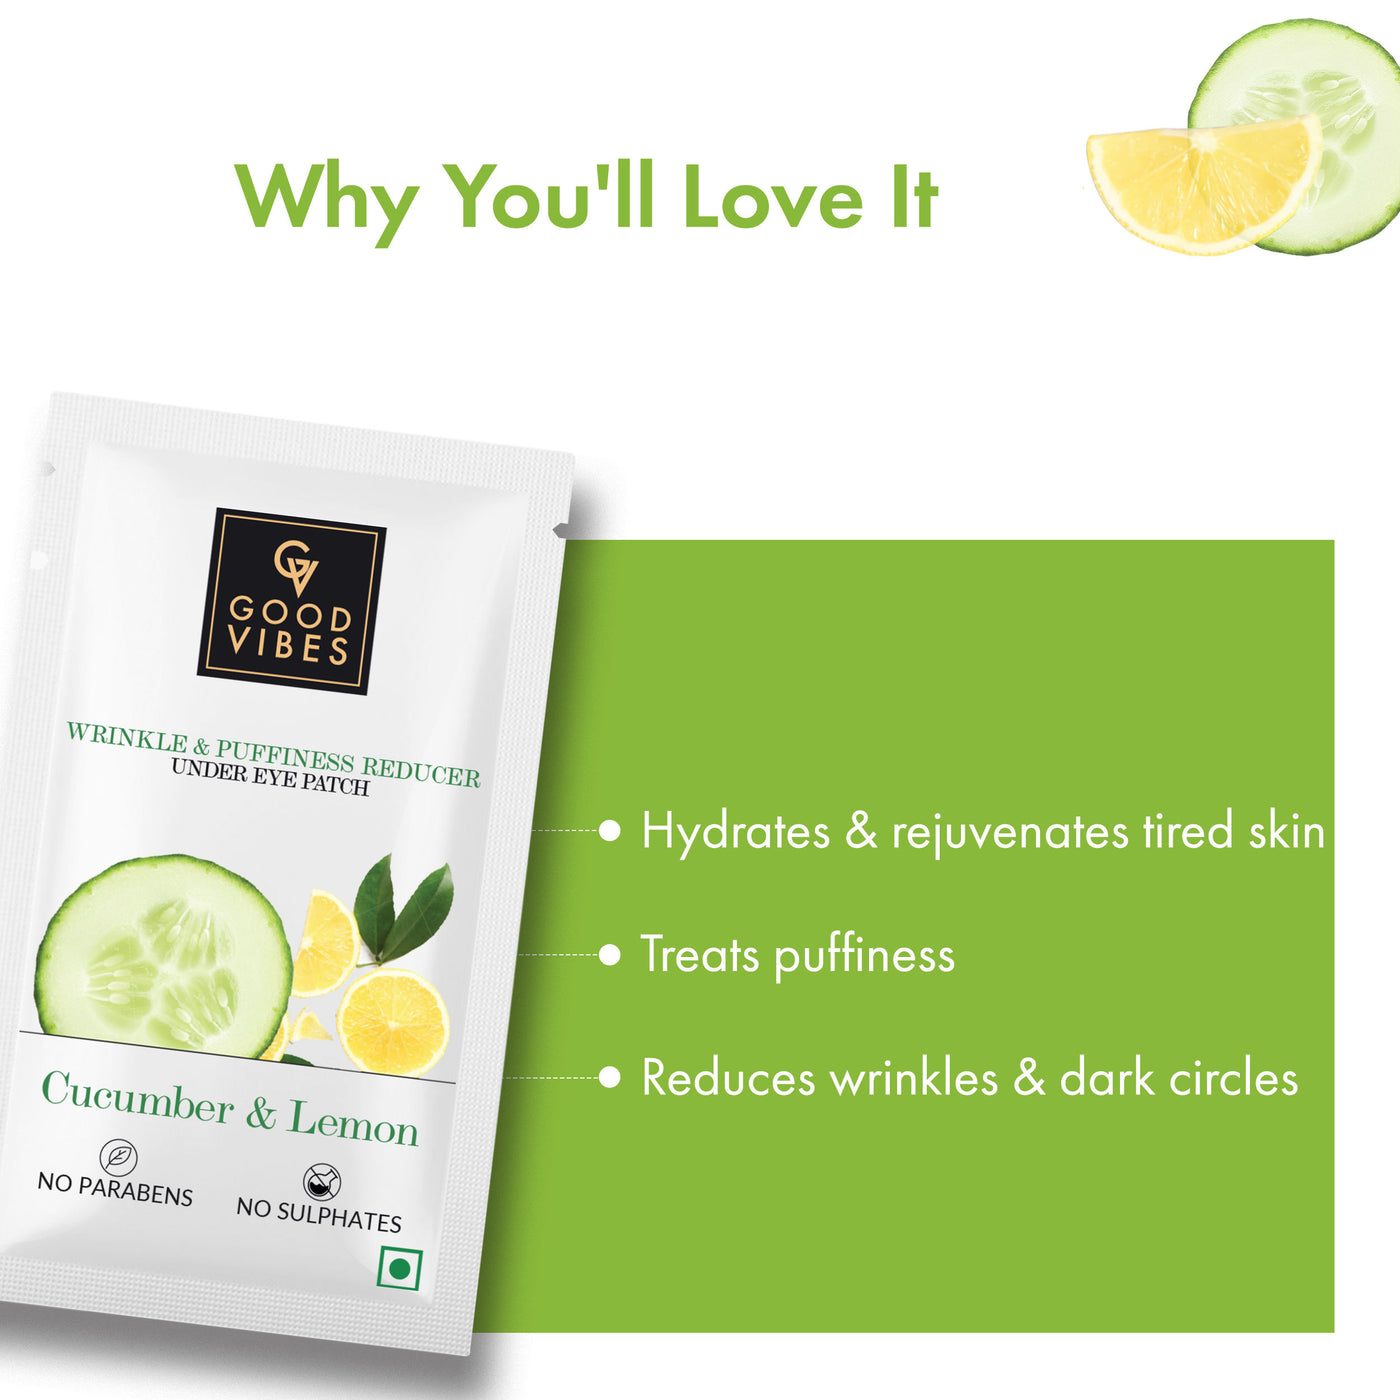 good-vibes-wrinkle-and-puffiness-reducer-under-eye-patch-cucumber-and-lemon-20-ml-6